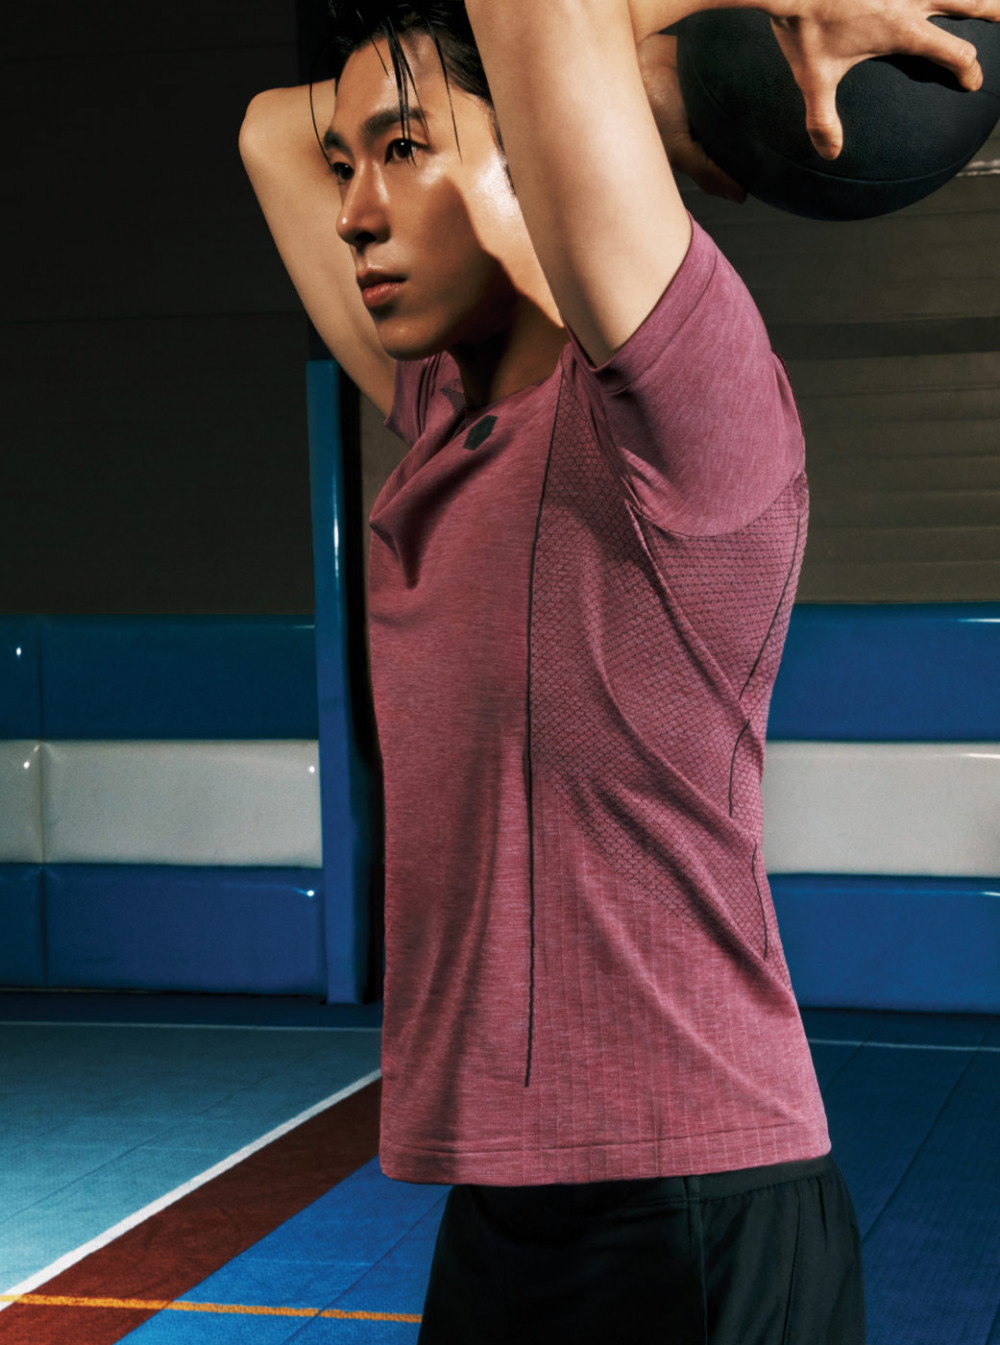 tvxq-yunho-talks-about-his-workout-routine-and-new-goals-3